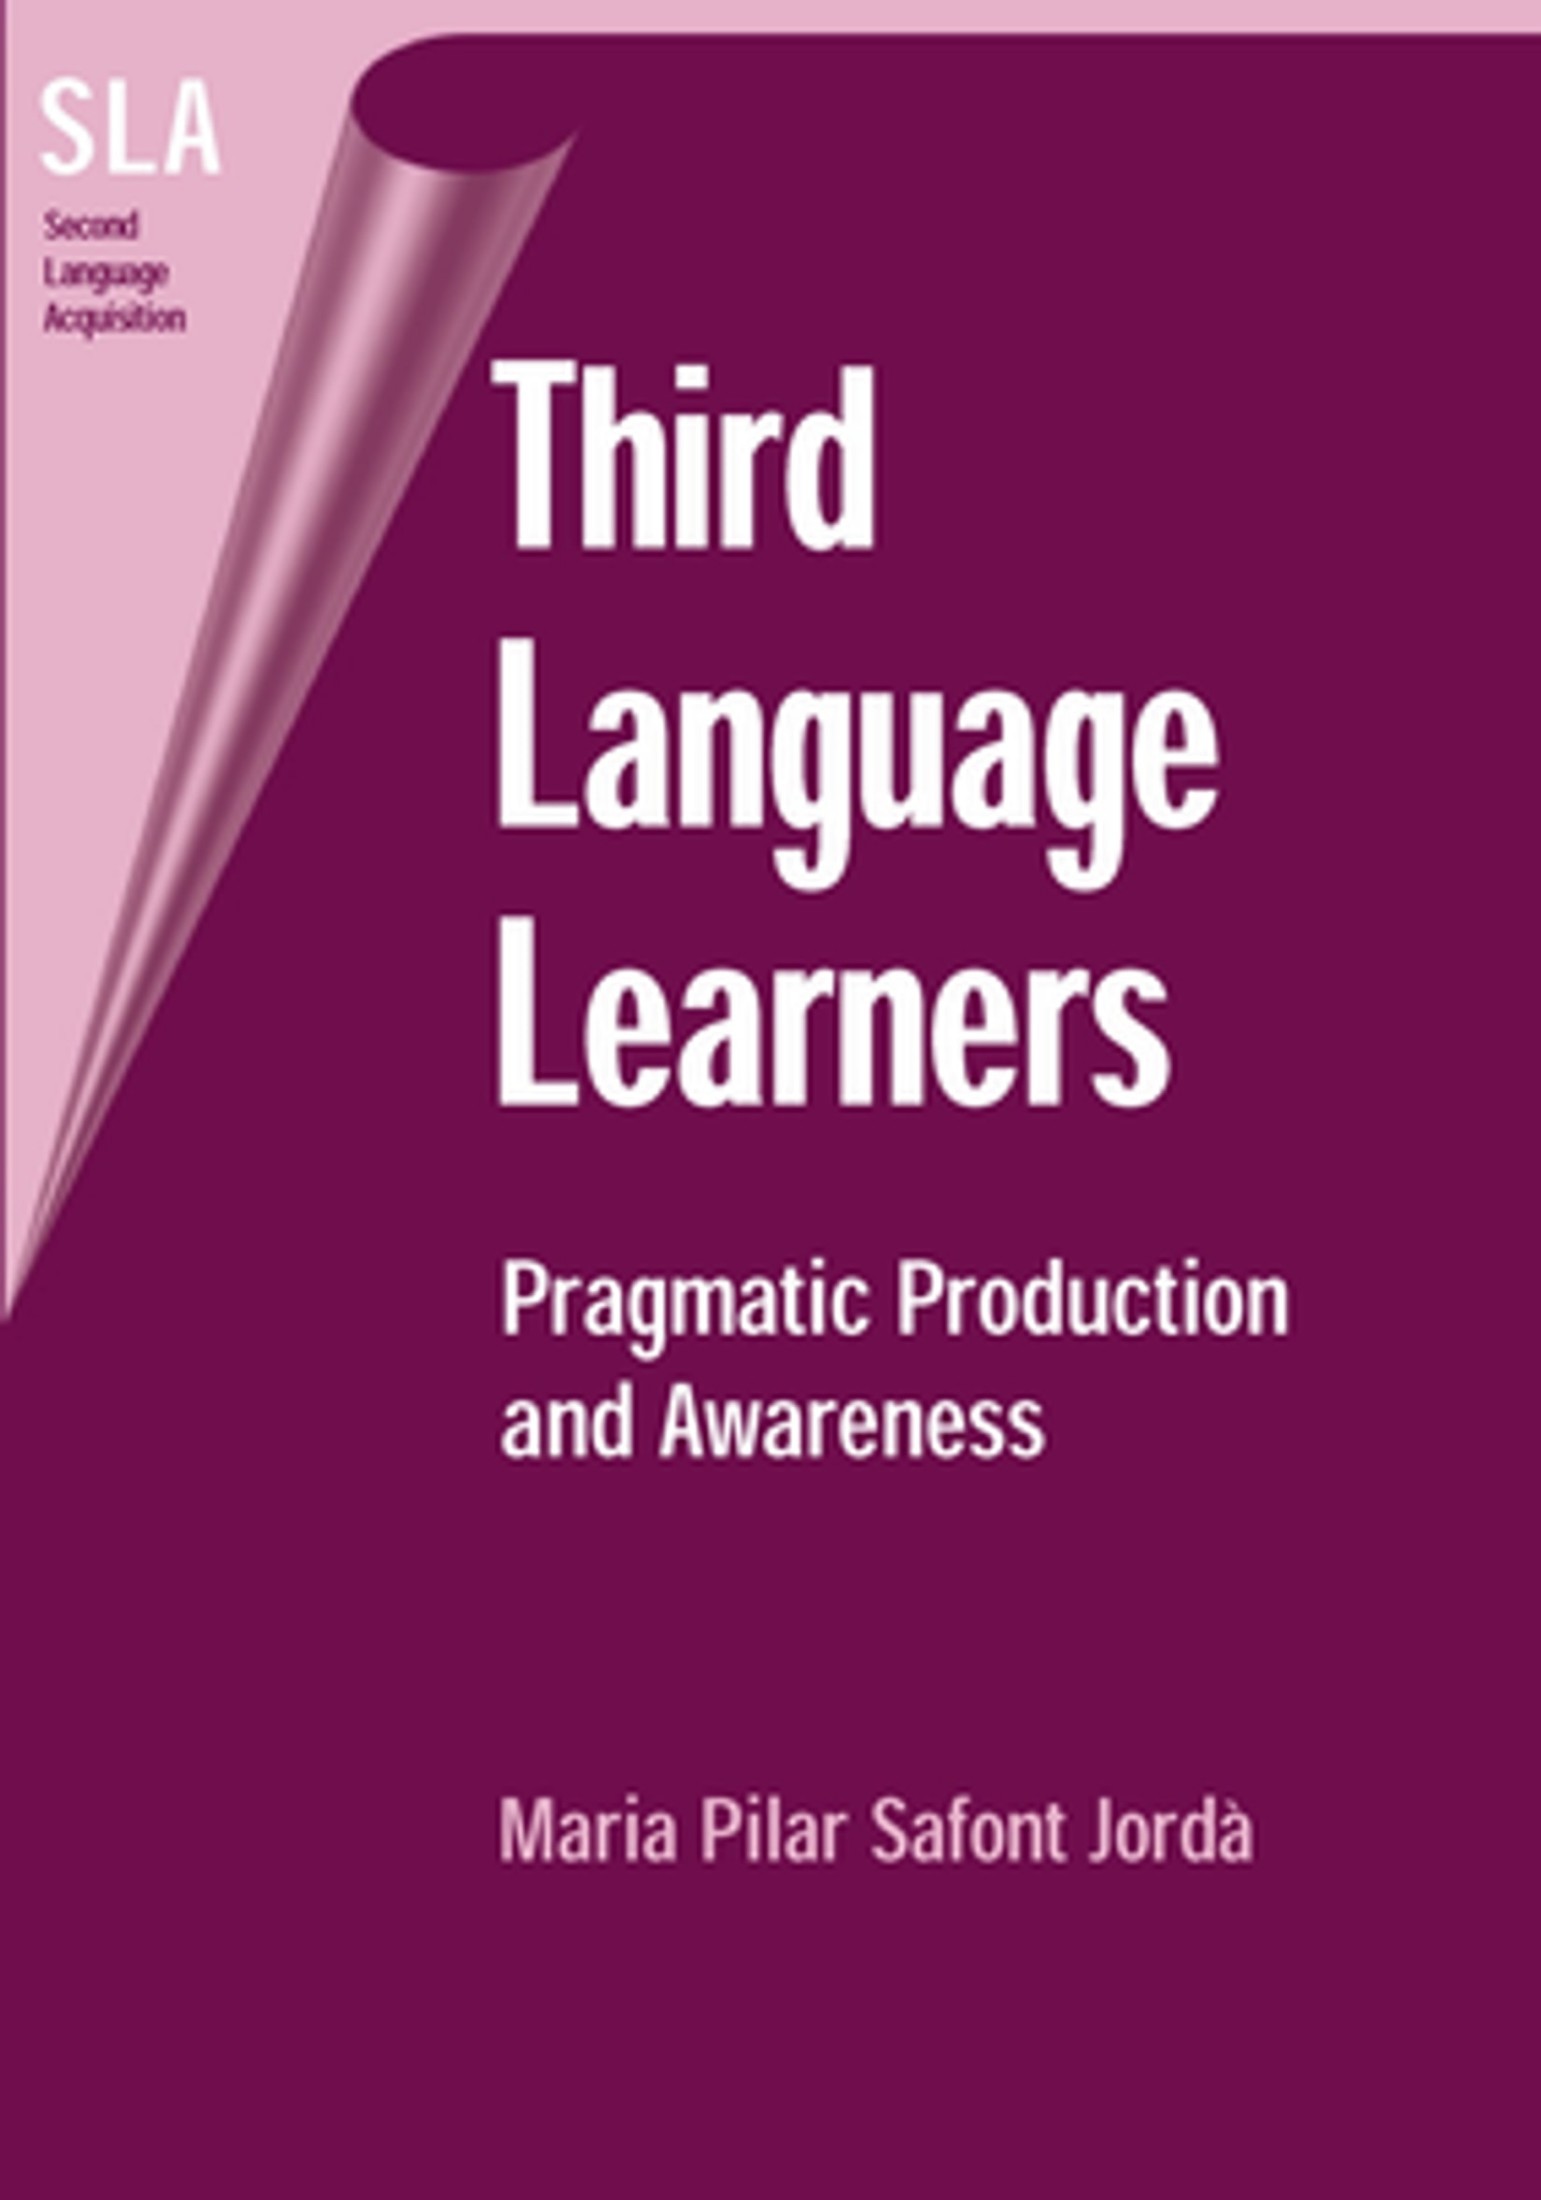 Third Language Learners: Pragmatic Production and Awareness